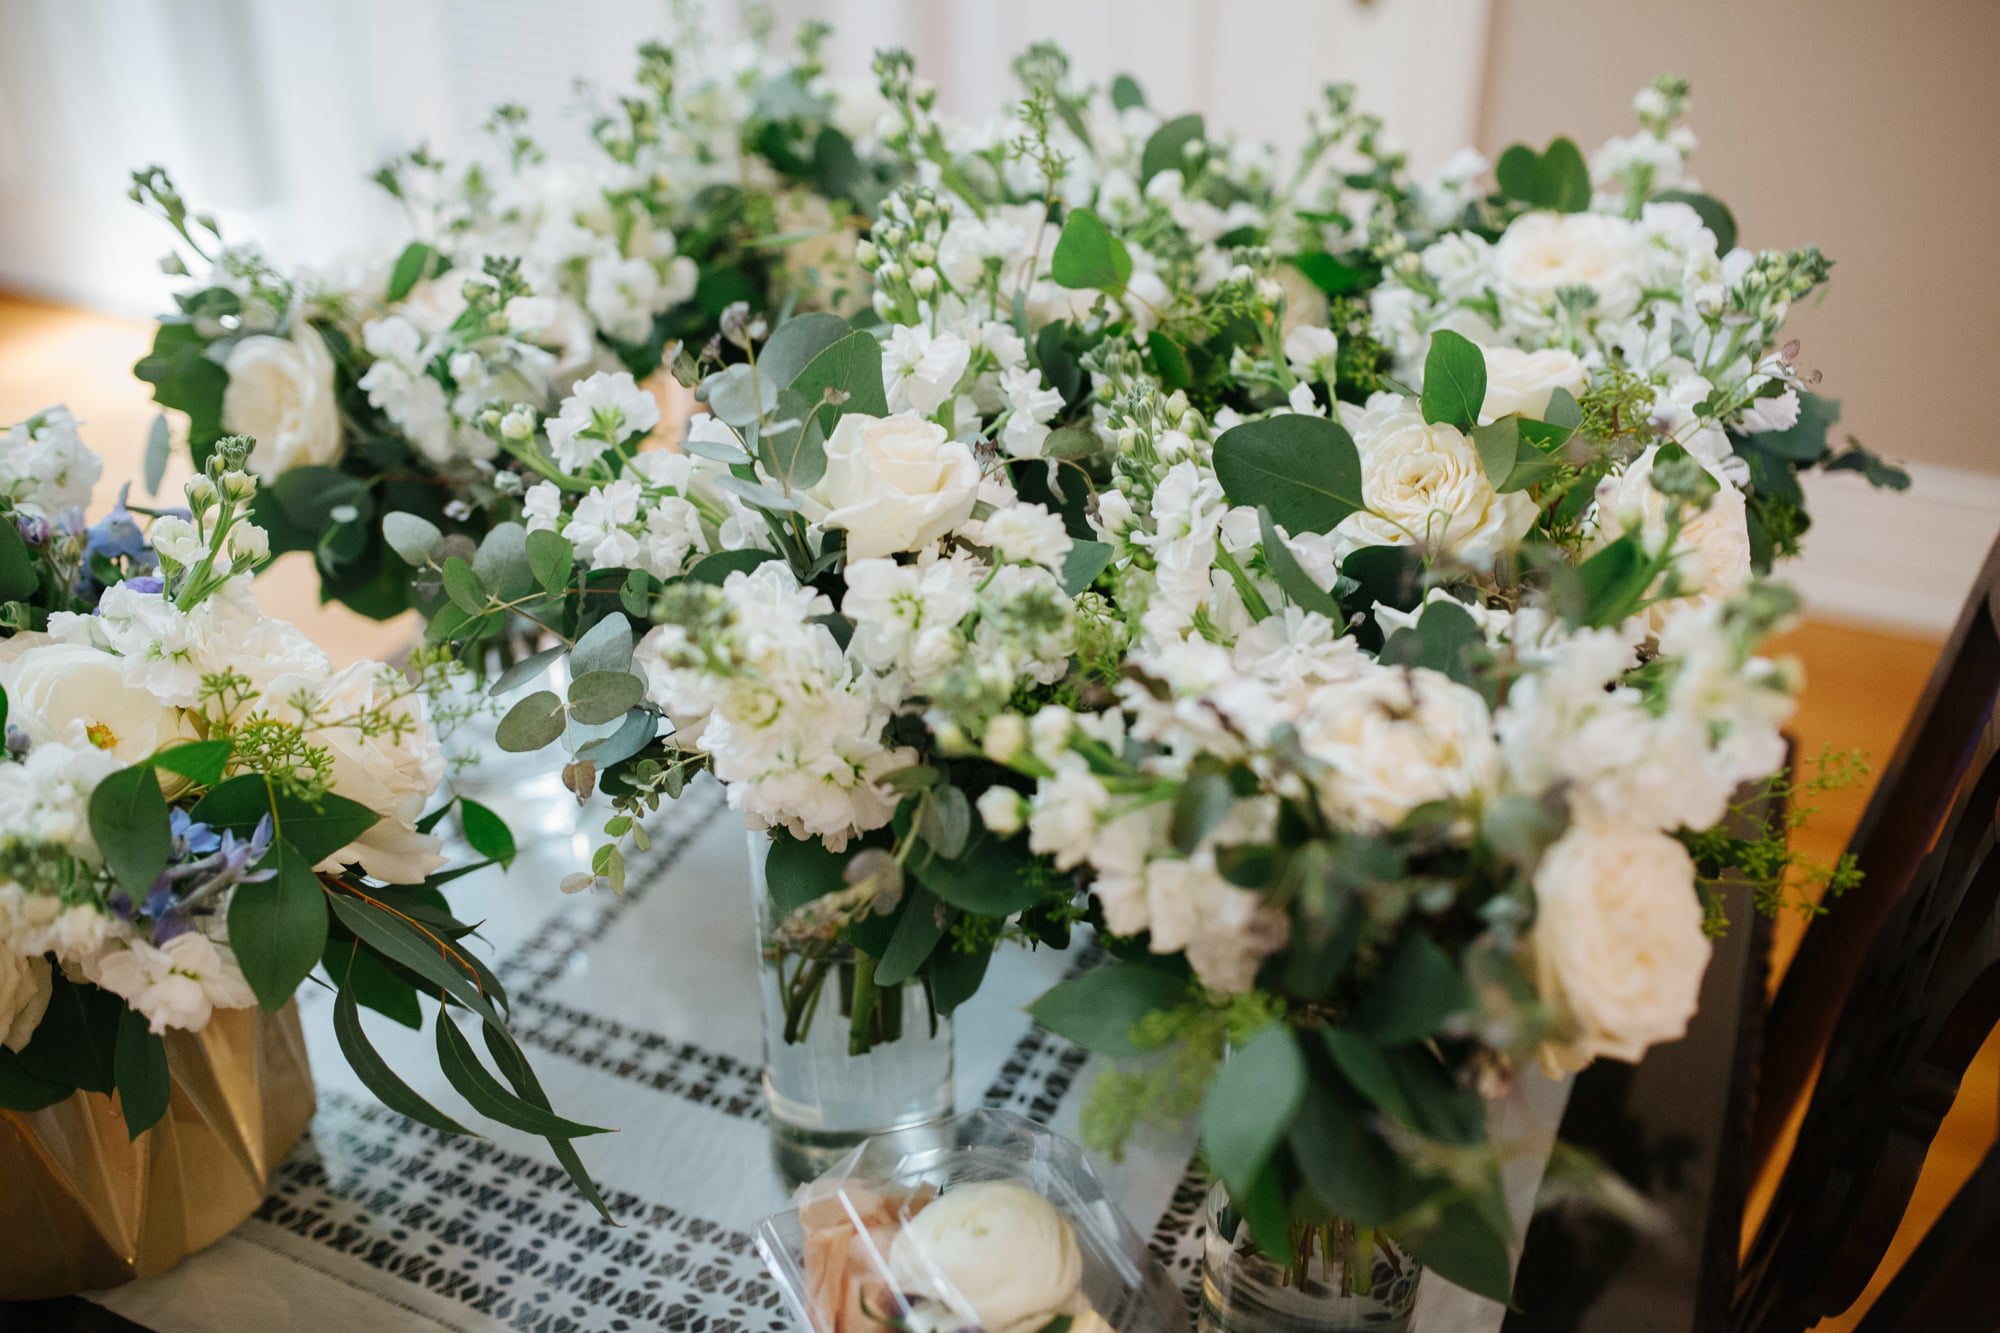 green and white wedding florals, minimal wedding flowers, white wedding flowers, white bridal bouquet, white and green bridal flowers